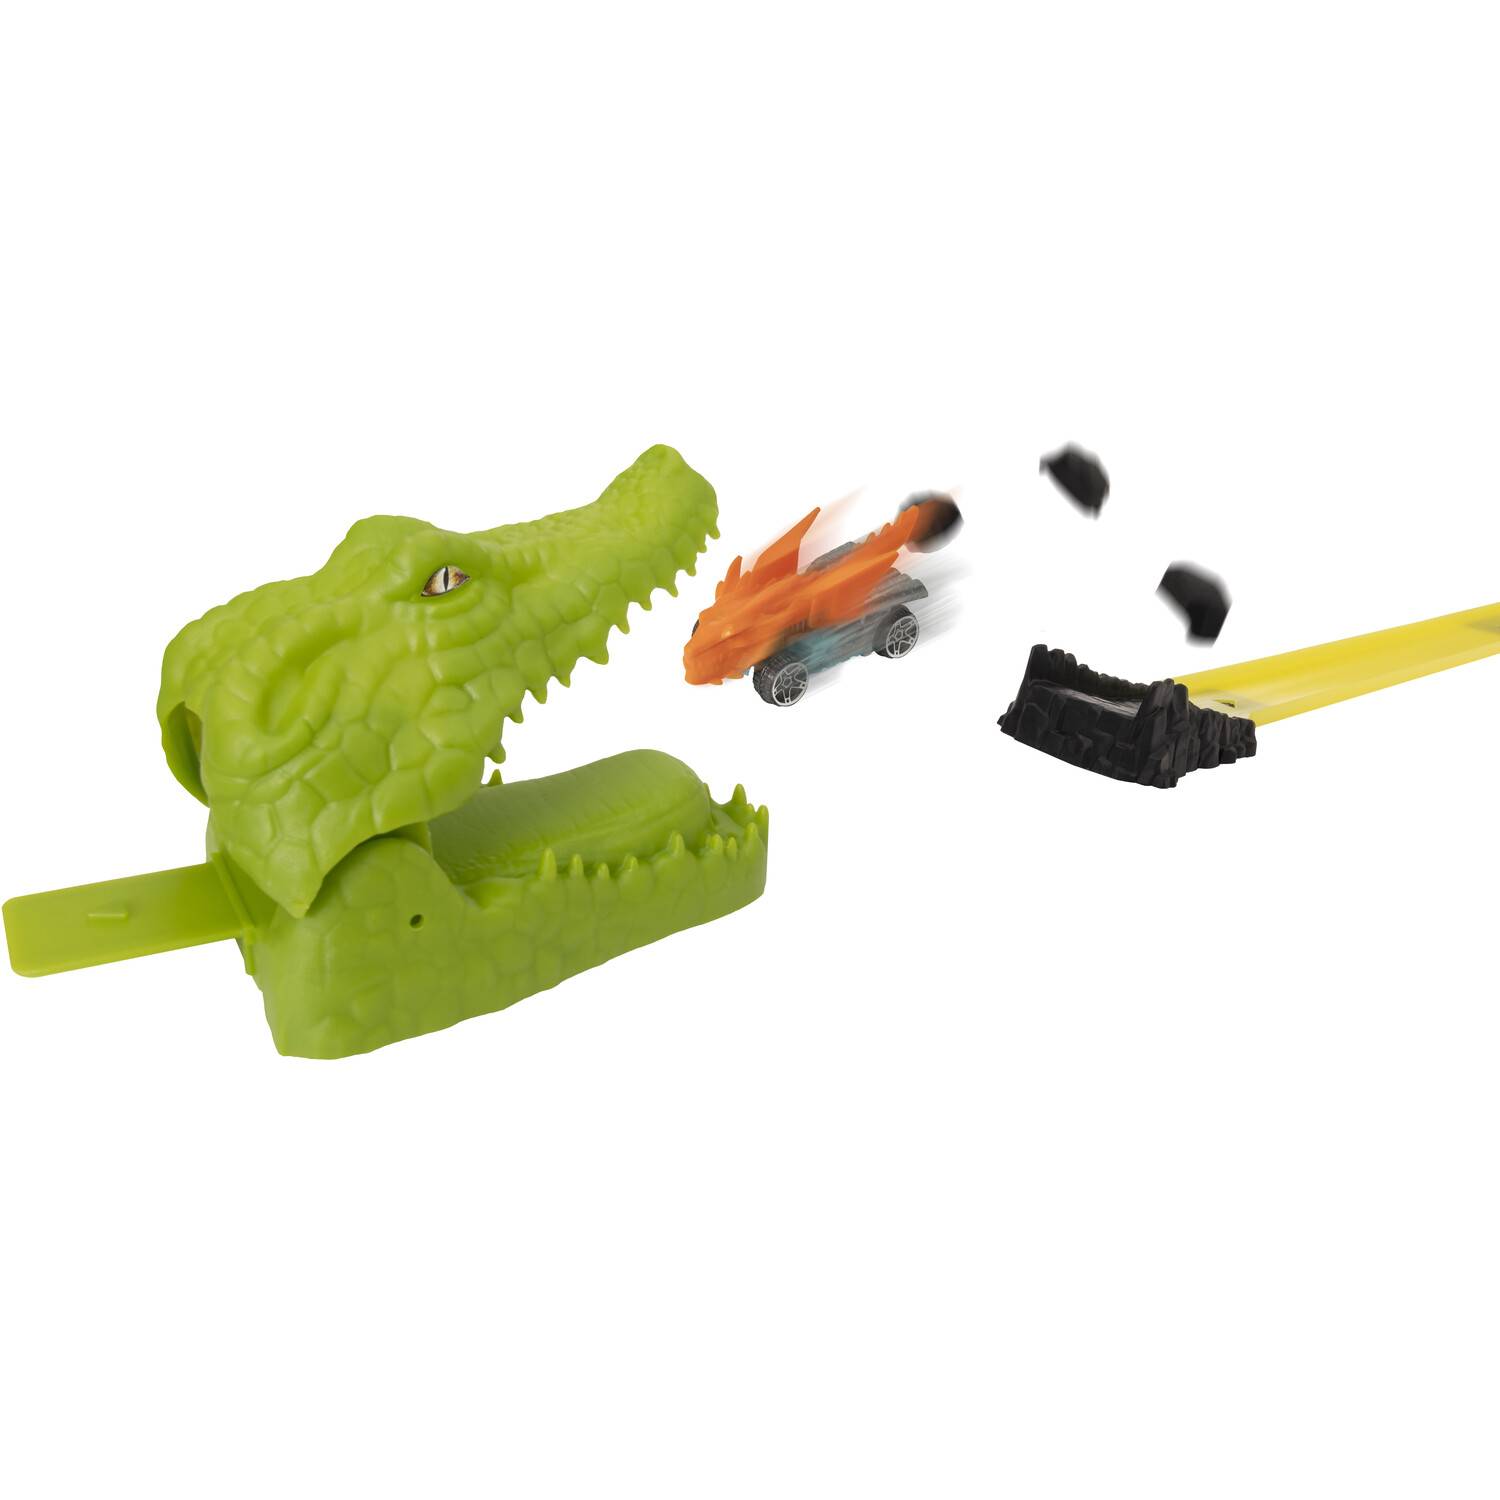 Teamsterz Croc Attack Track Playset Image 5